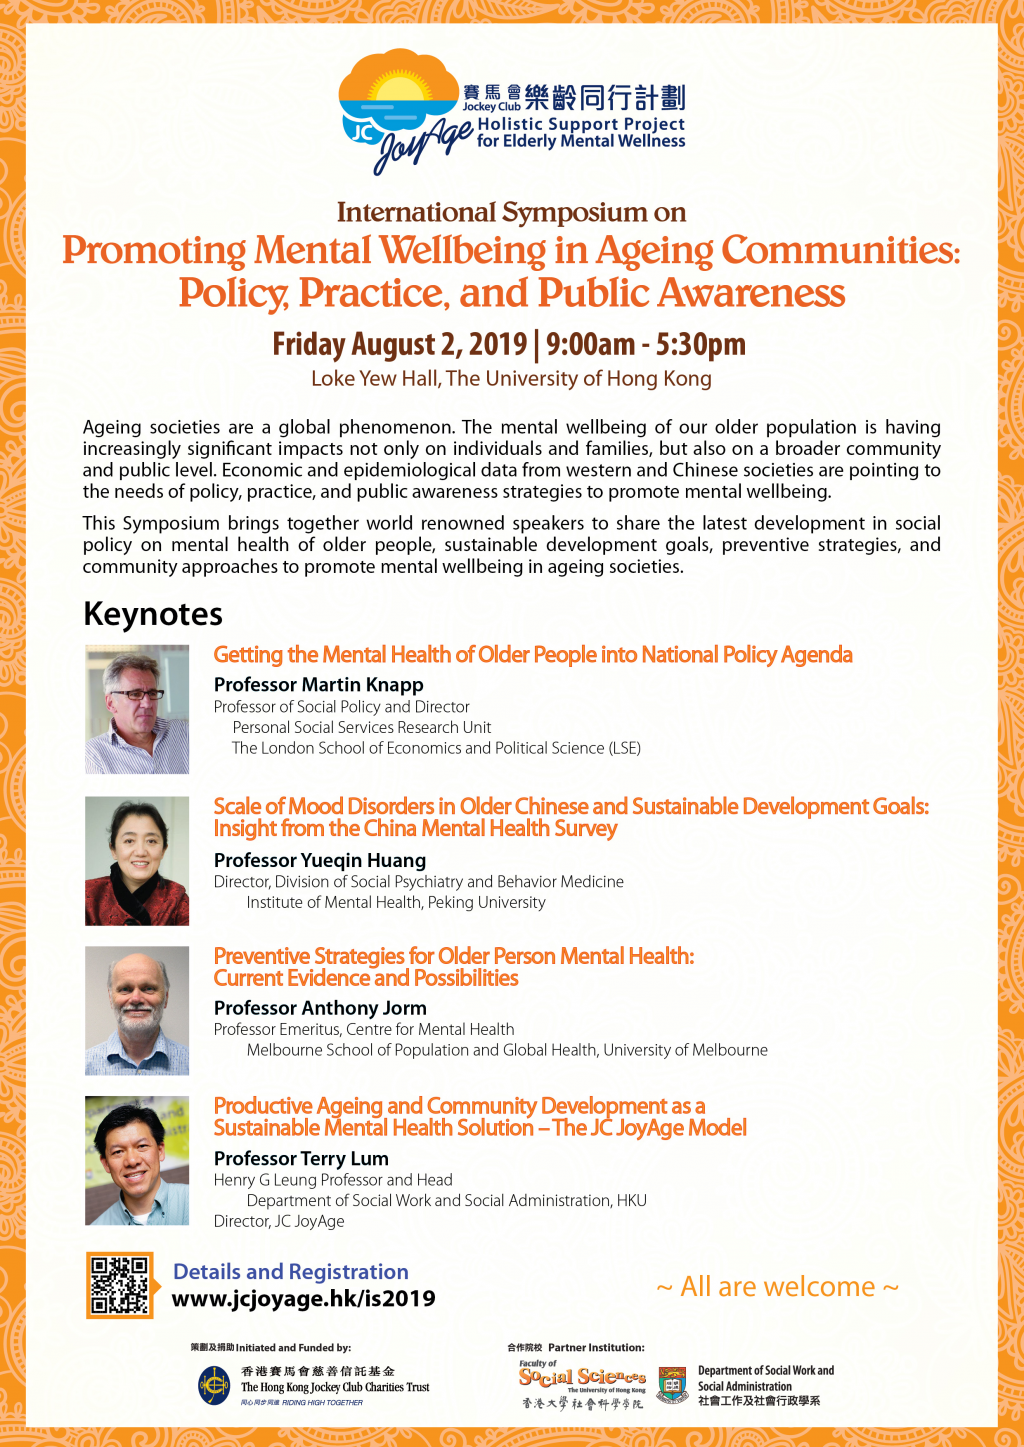 JC JoyAge International Symposium on Promoting Mental Wellbeing in Ageing Communities: Policy, Practice, and Public Awareness